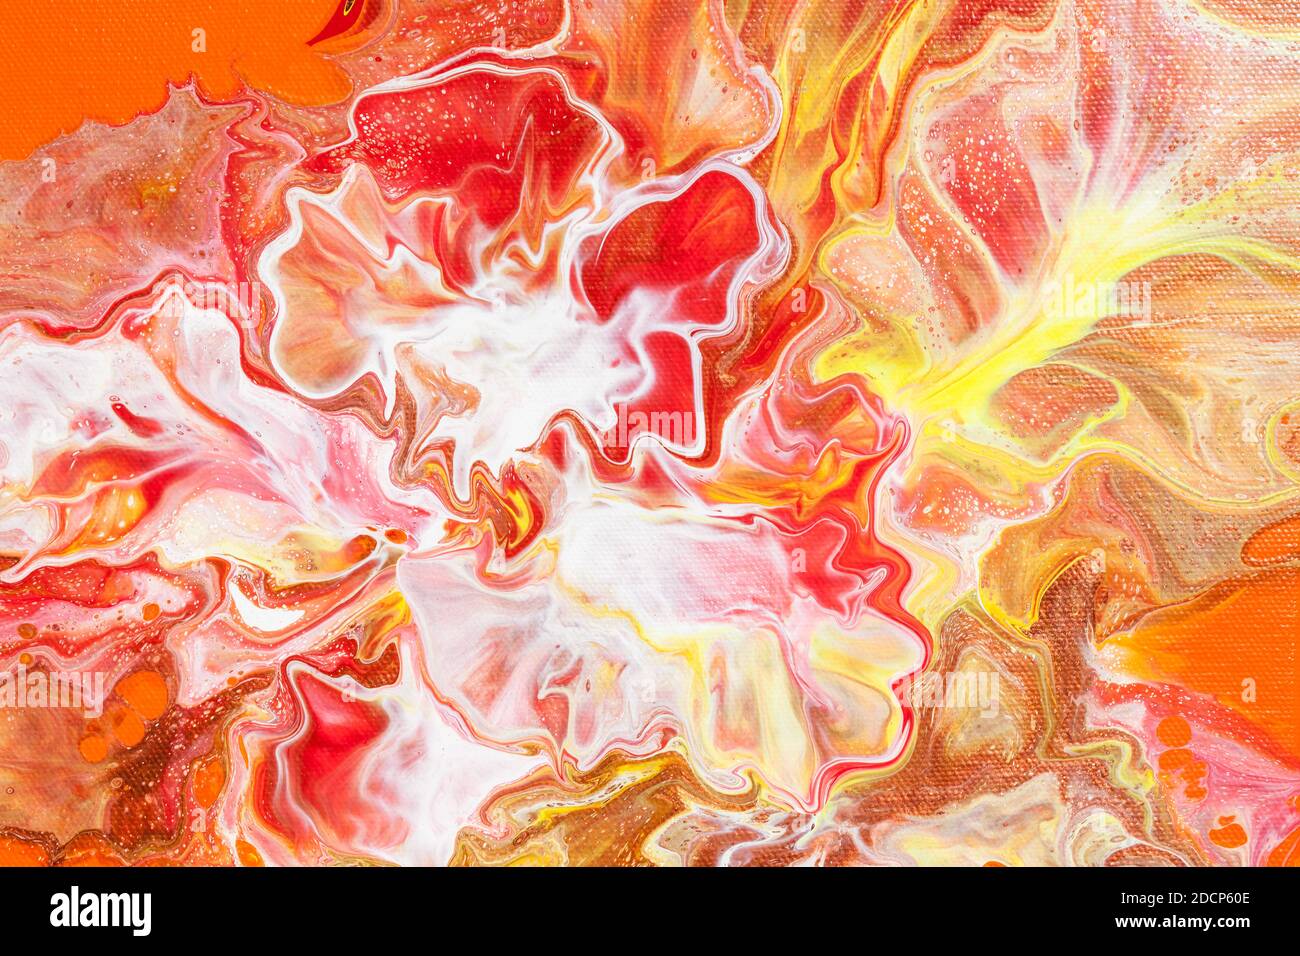 Freakish colorful stains of liquid paint. Orange fluid art abstract background Stock Photo